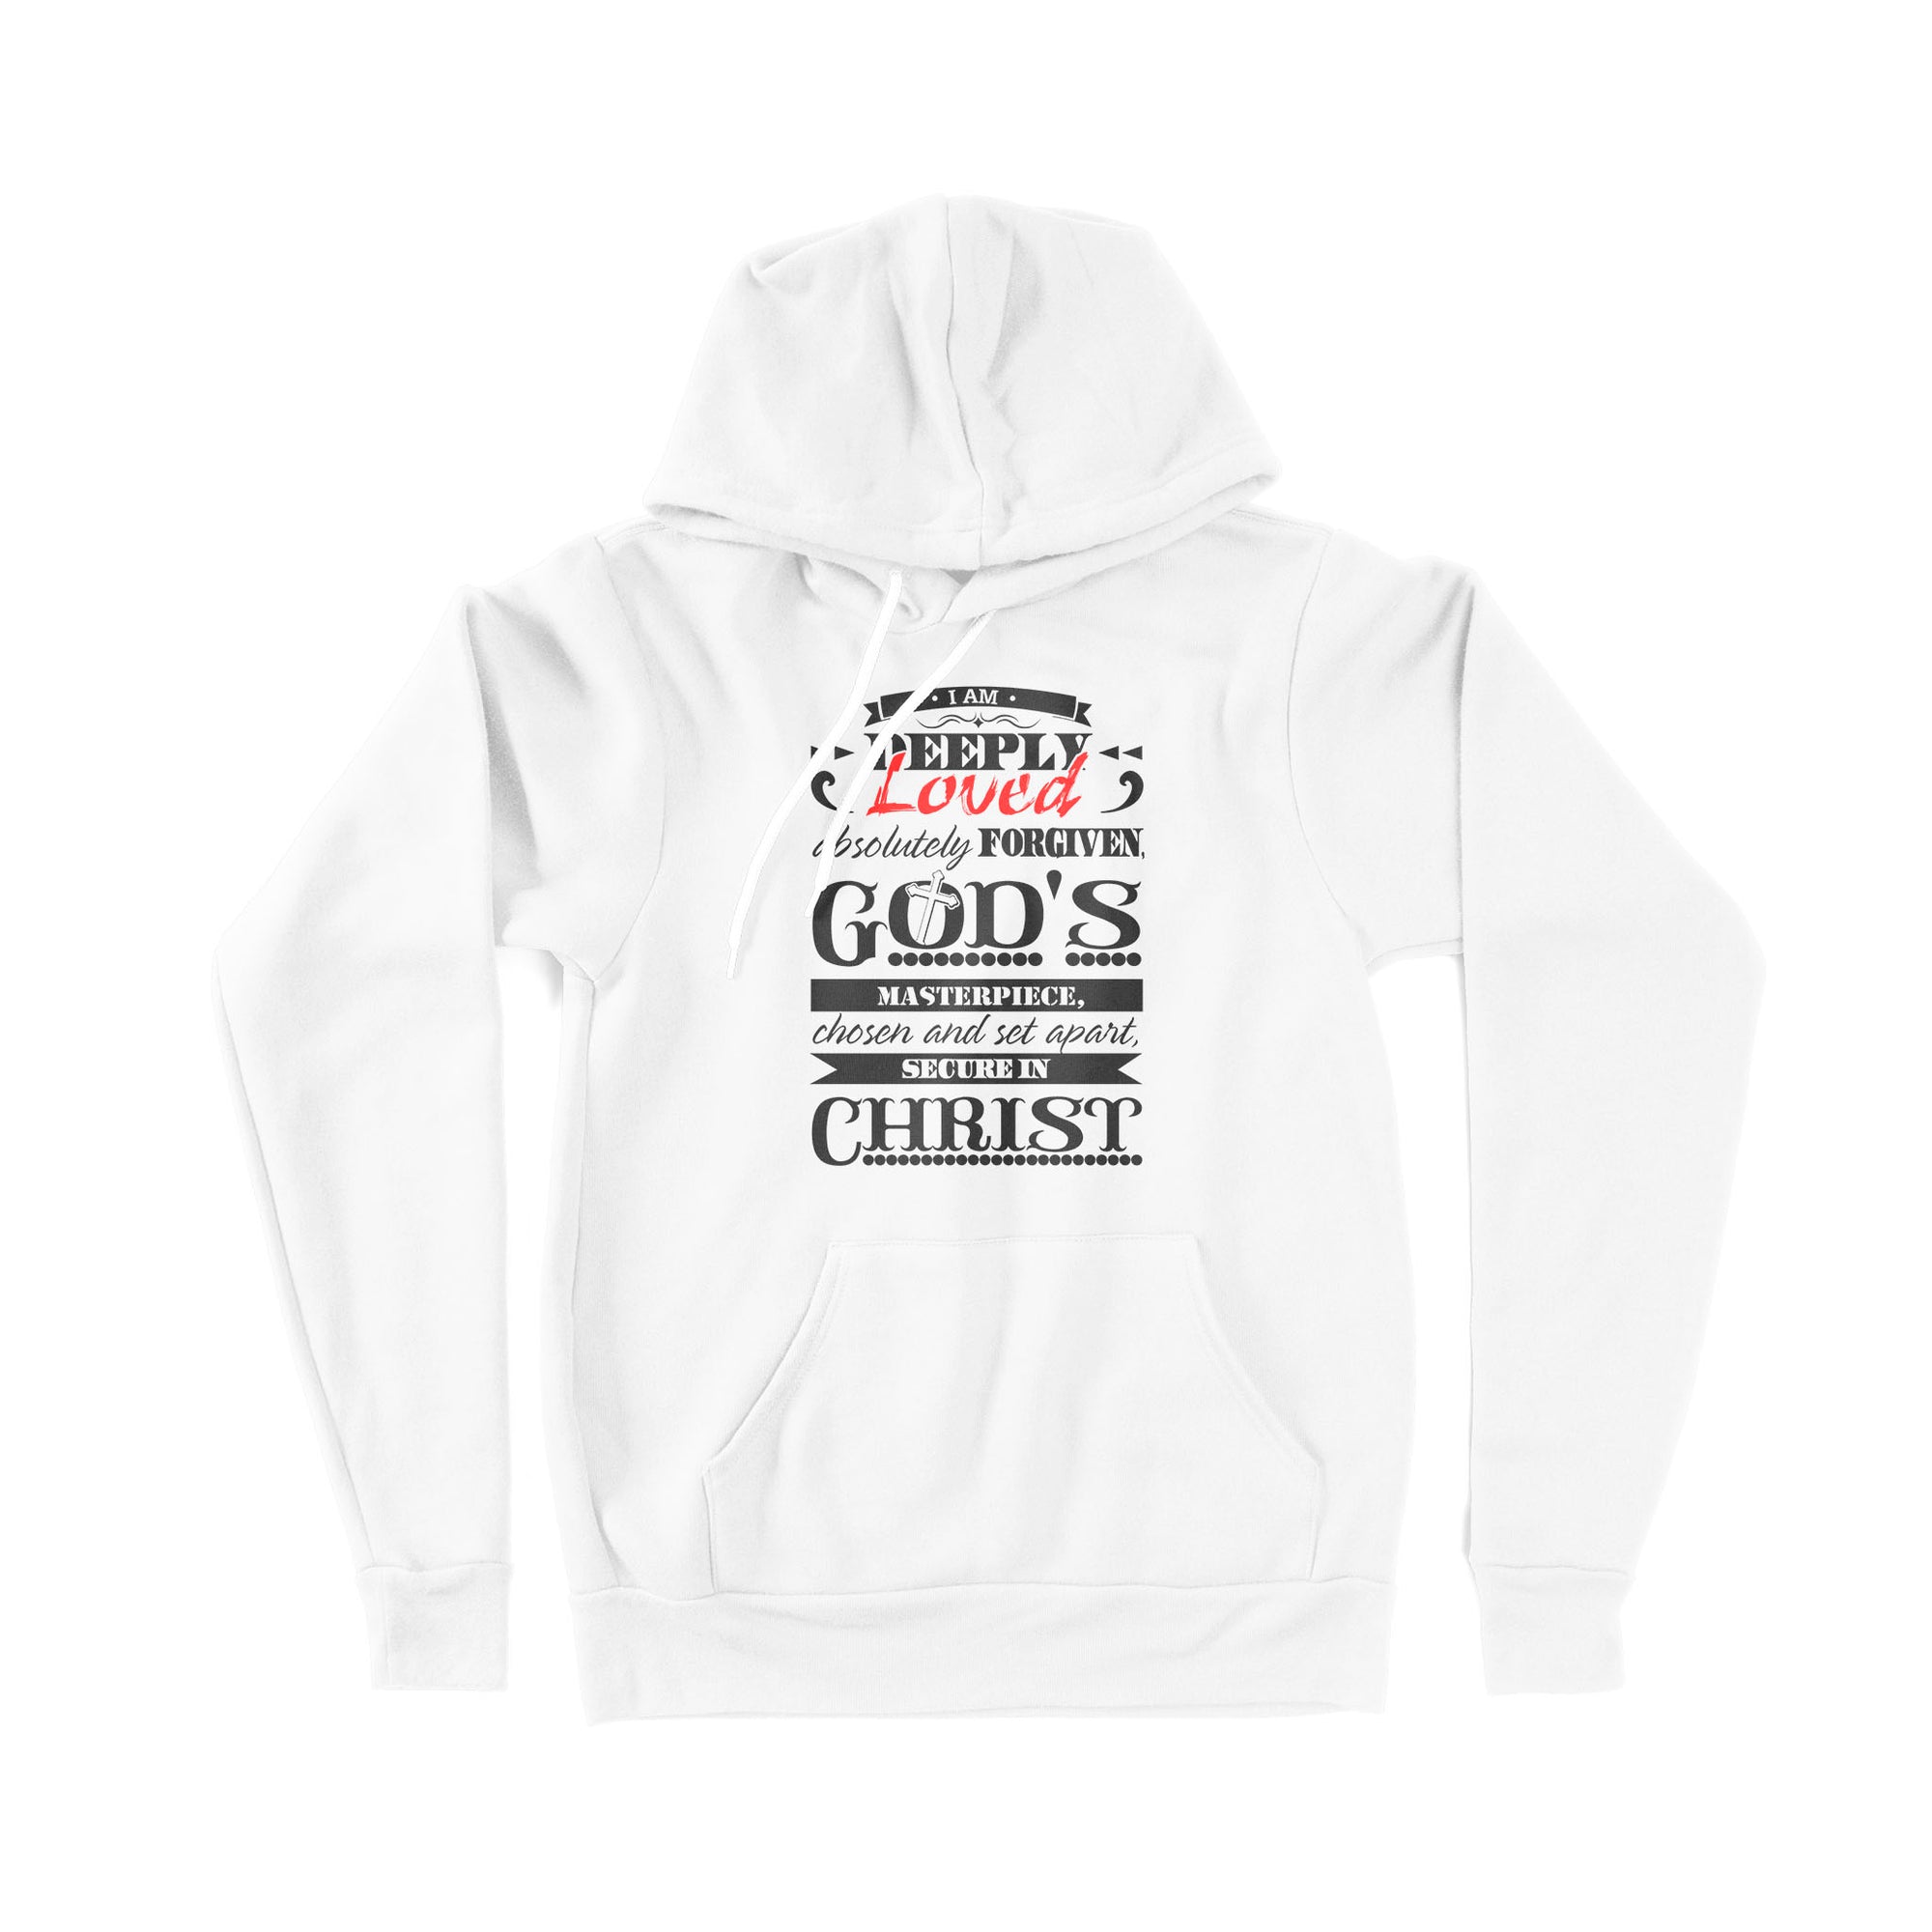 I Am Deeply Loved, Absolutely Forgiven, God's Masterpiece, Chosen and Set Apart, Secure in Christ - Premium Hoodie